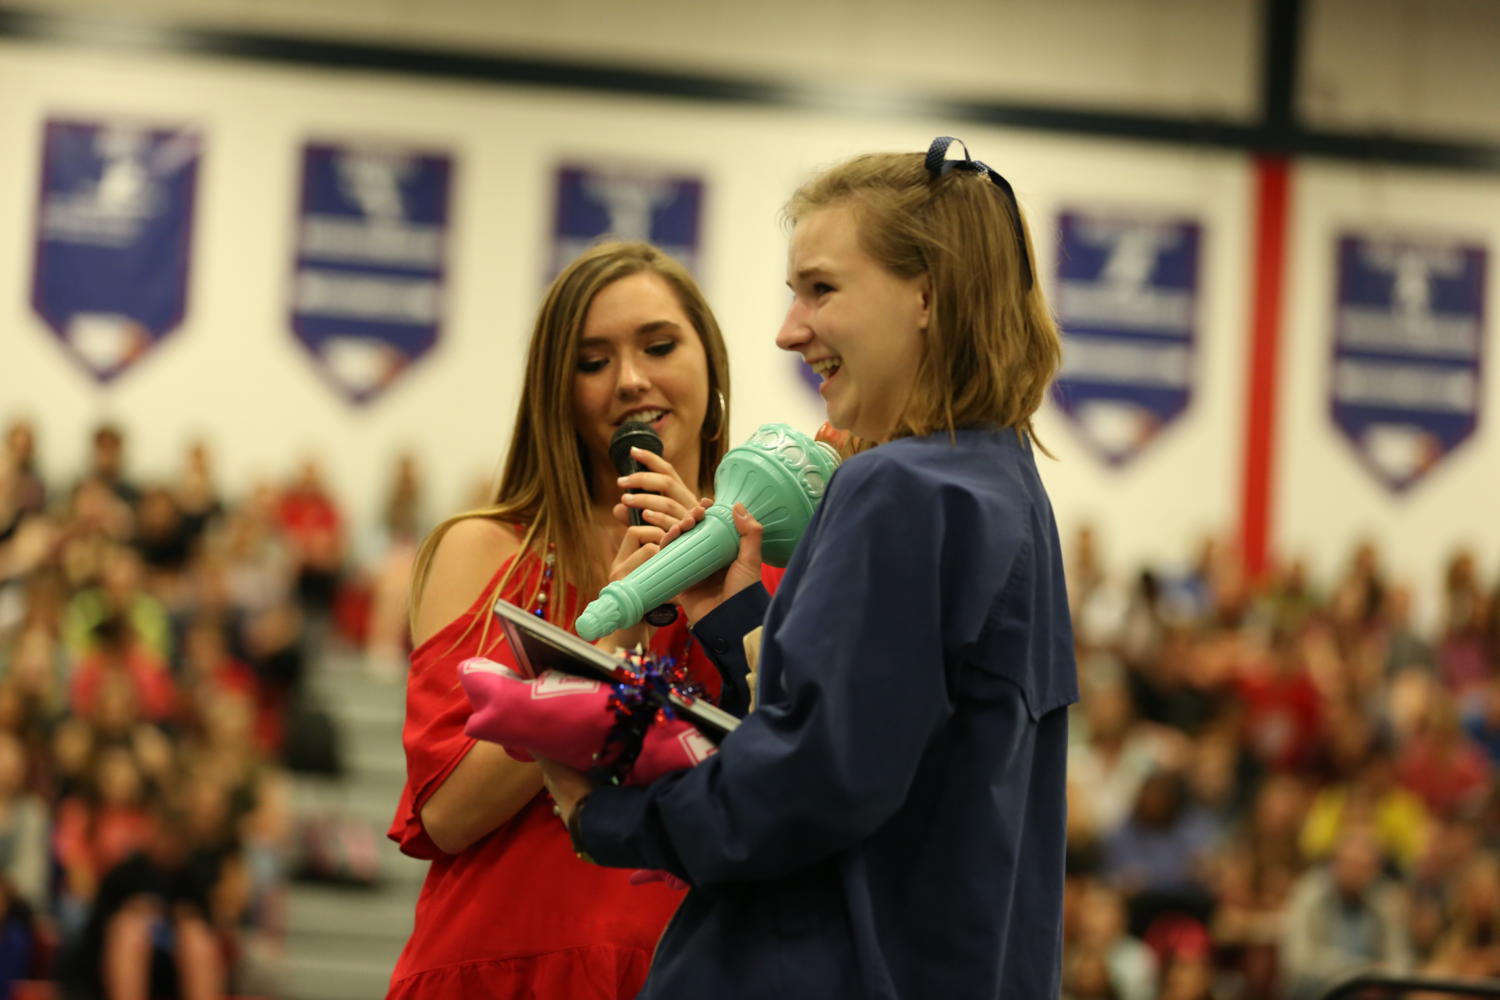 Senior Danielle Corgan and junior Emma Ingle share a moment as the Lady Liberty legacy is passed down.